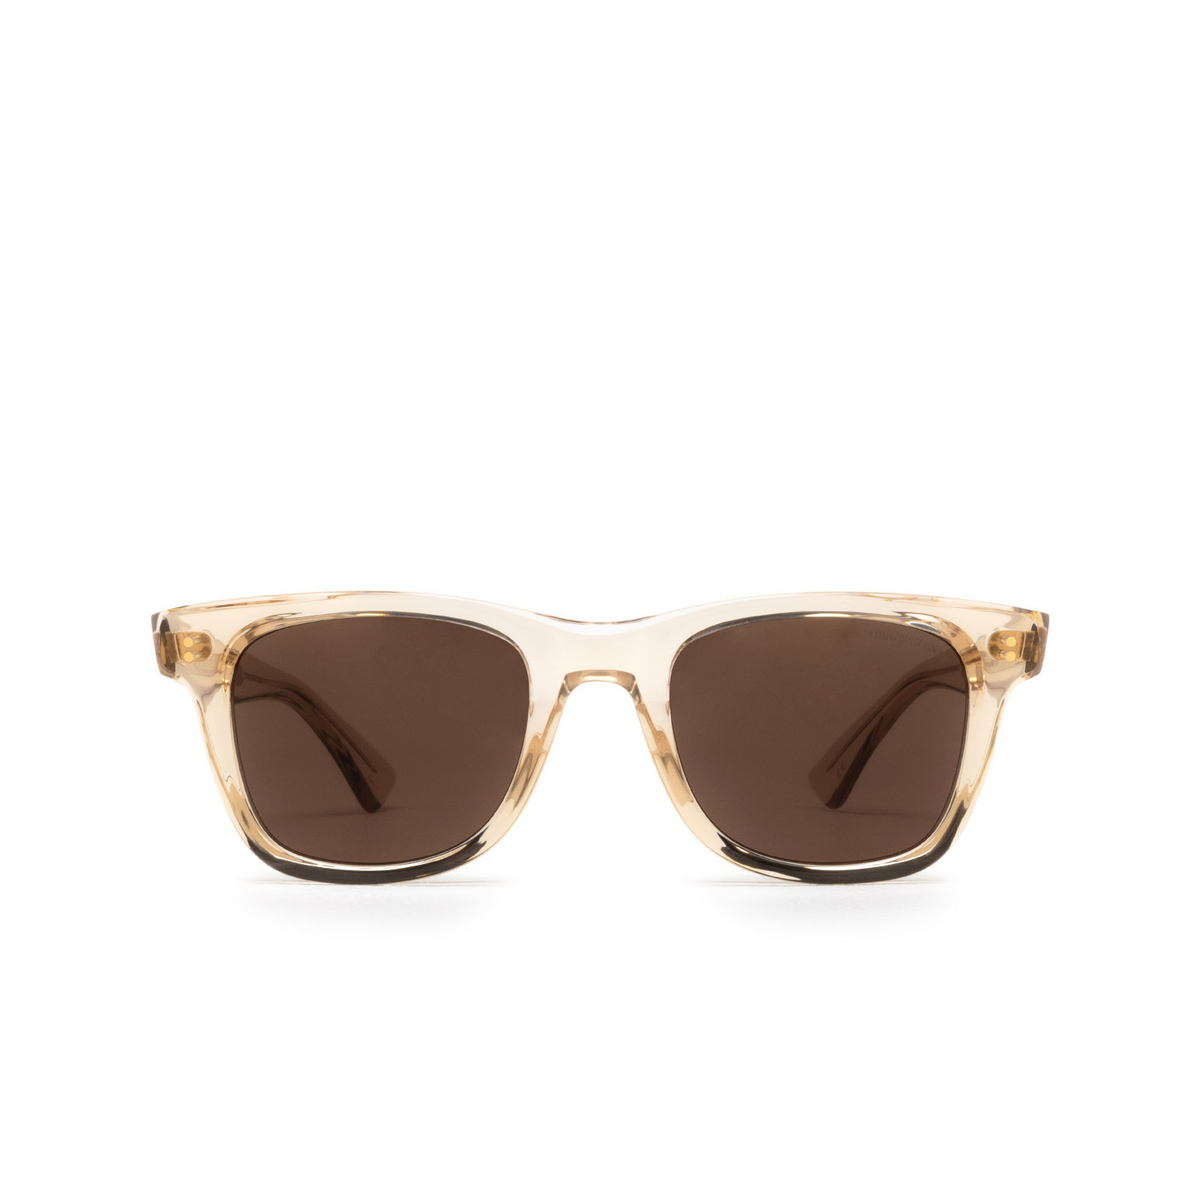 Cutler and Gross 9101 Sunglasses 02 Granny Chic - front view